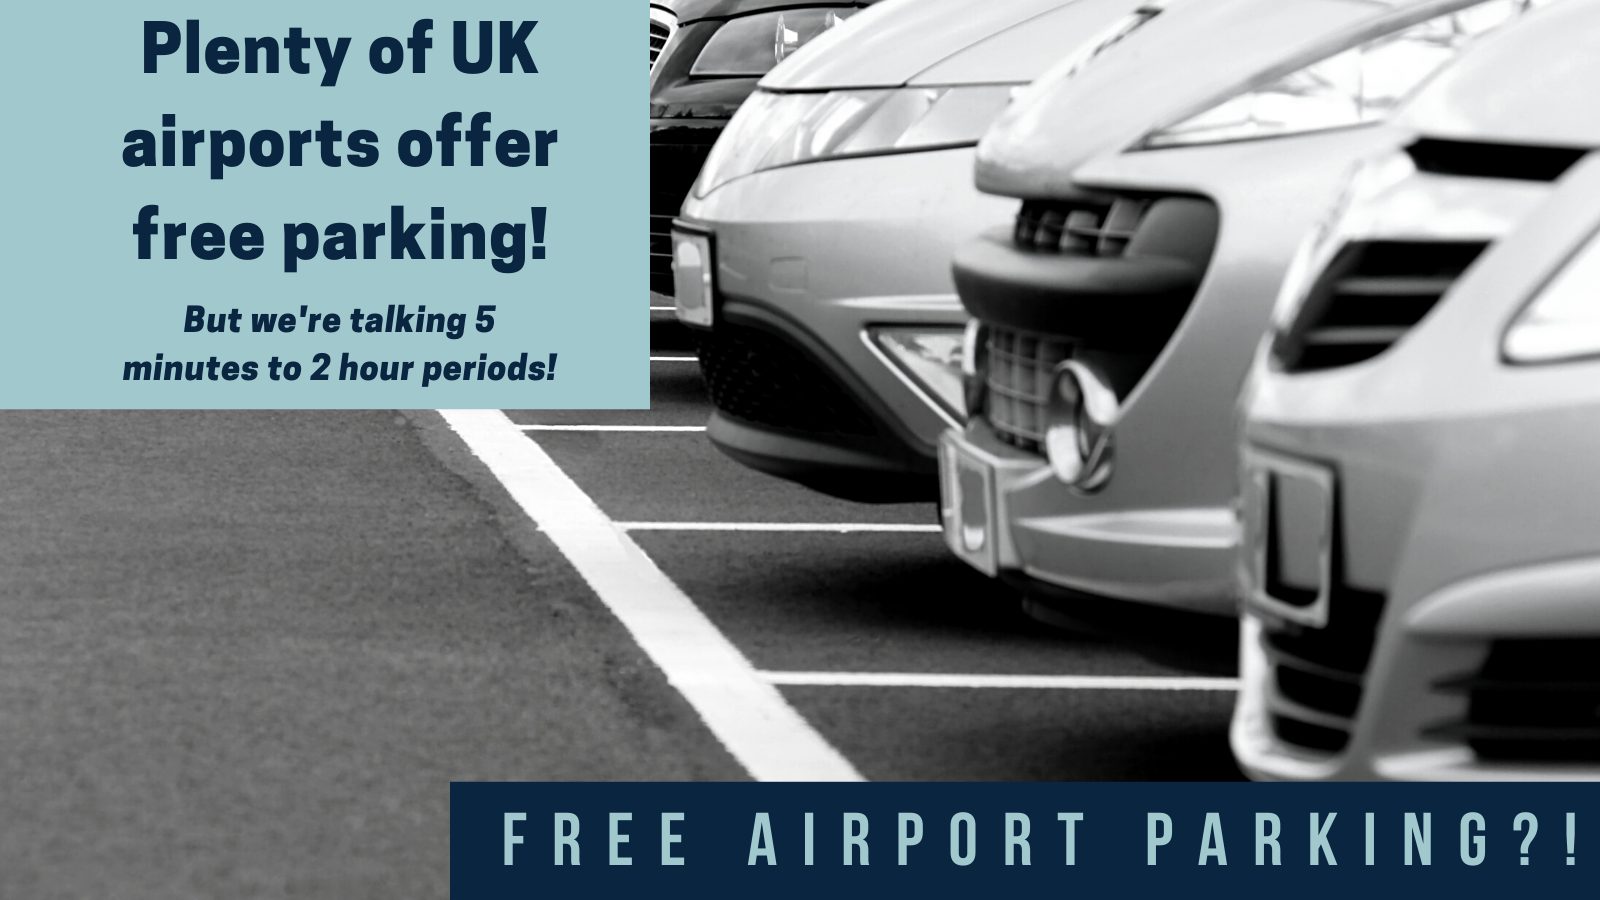 Free Airport parking